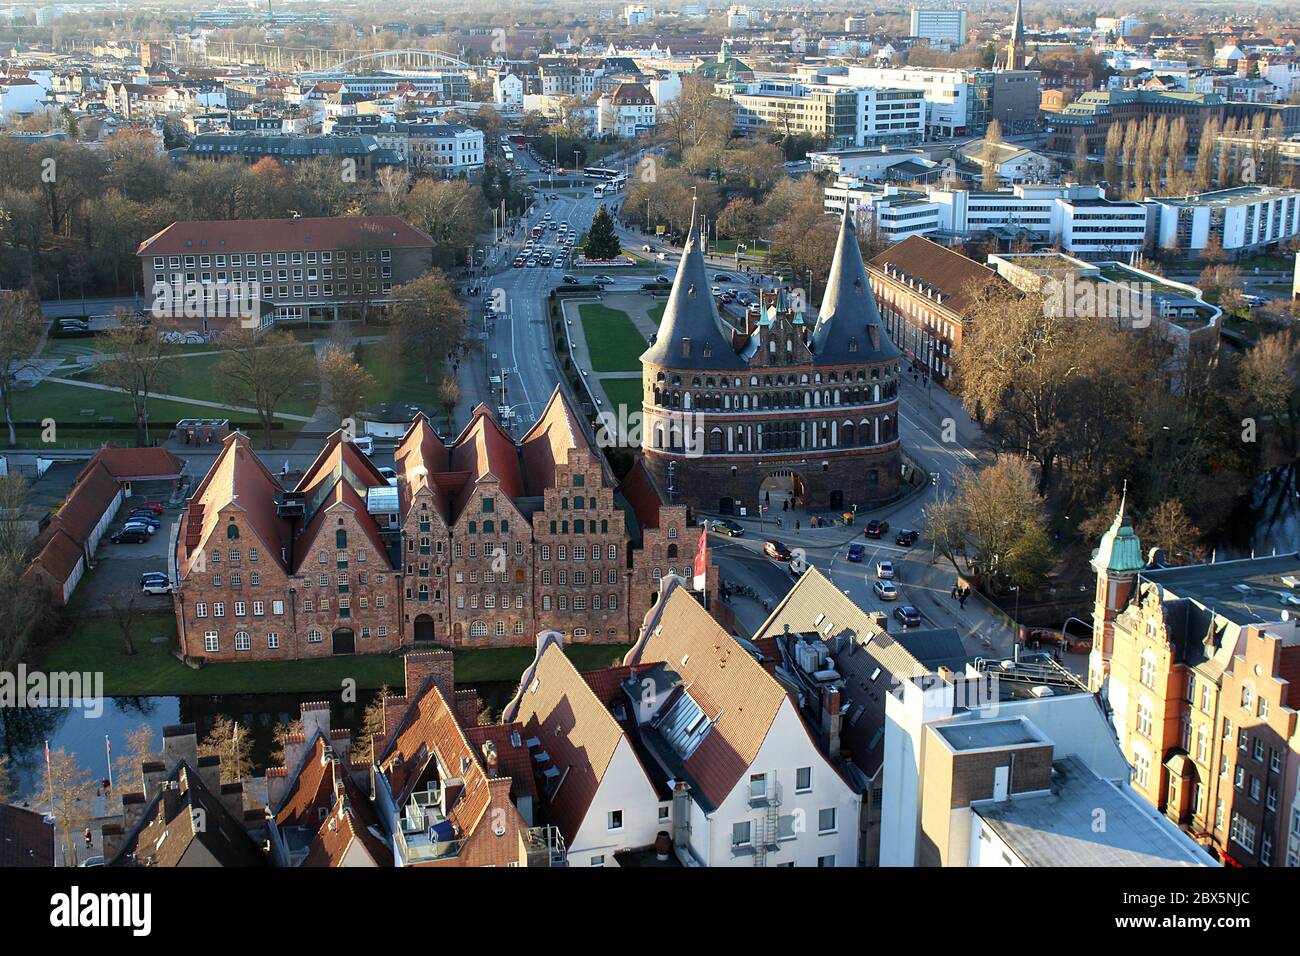 Holstentor town gate, the Salzspeicher, and the surrounding streets on a sunny winter evening seen from the Church of St Peter. Famous landmark. Stock Photo